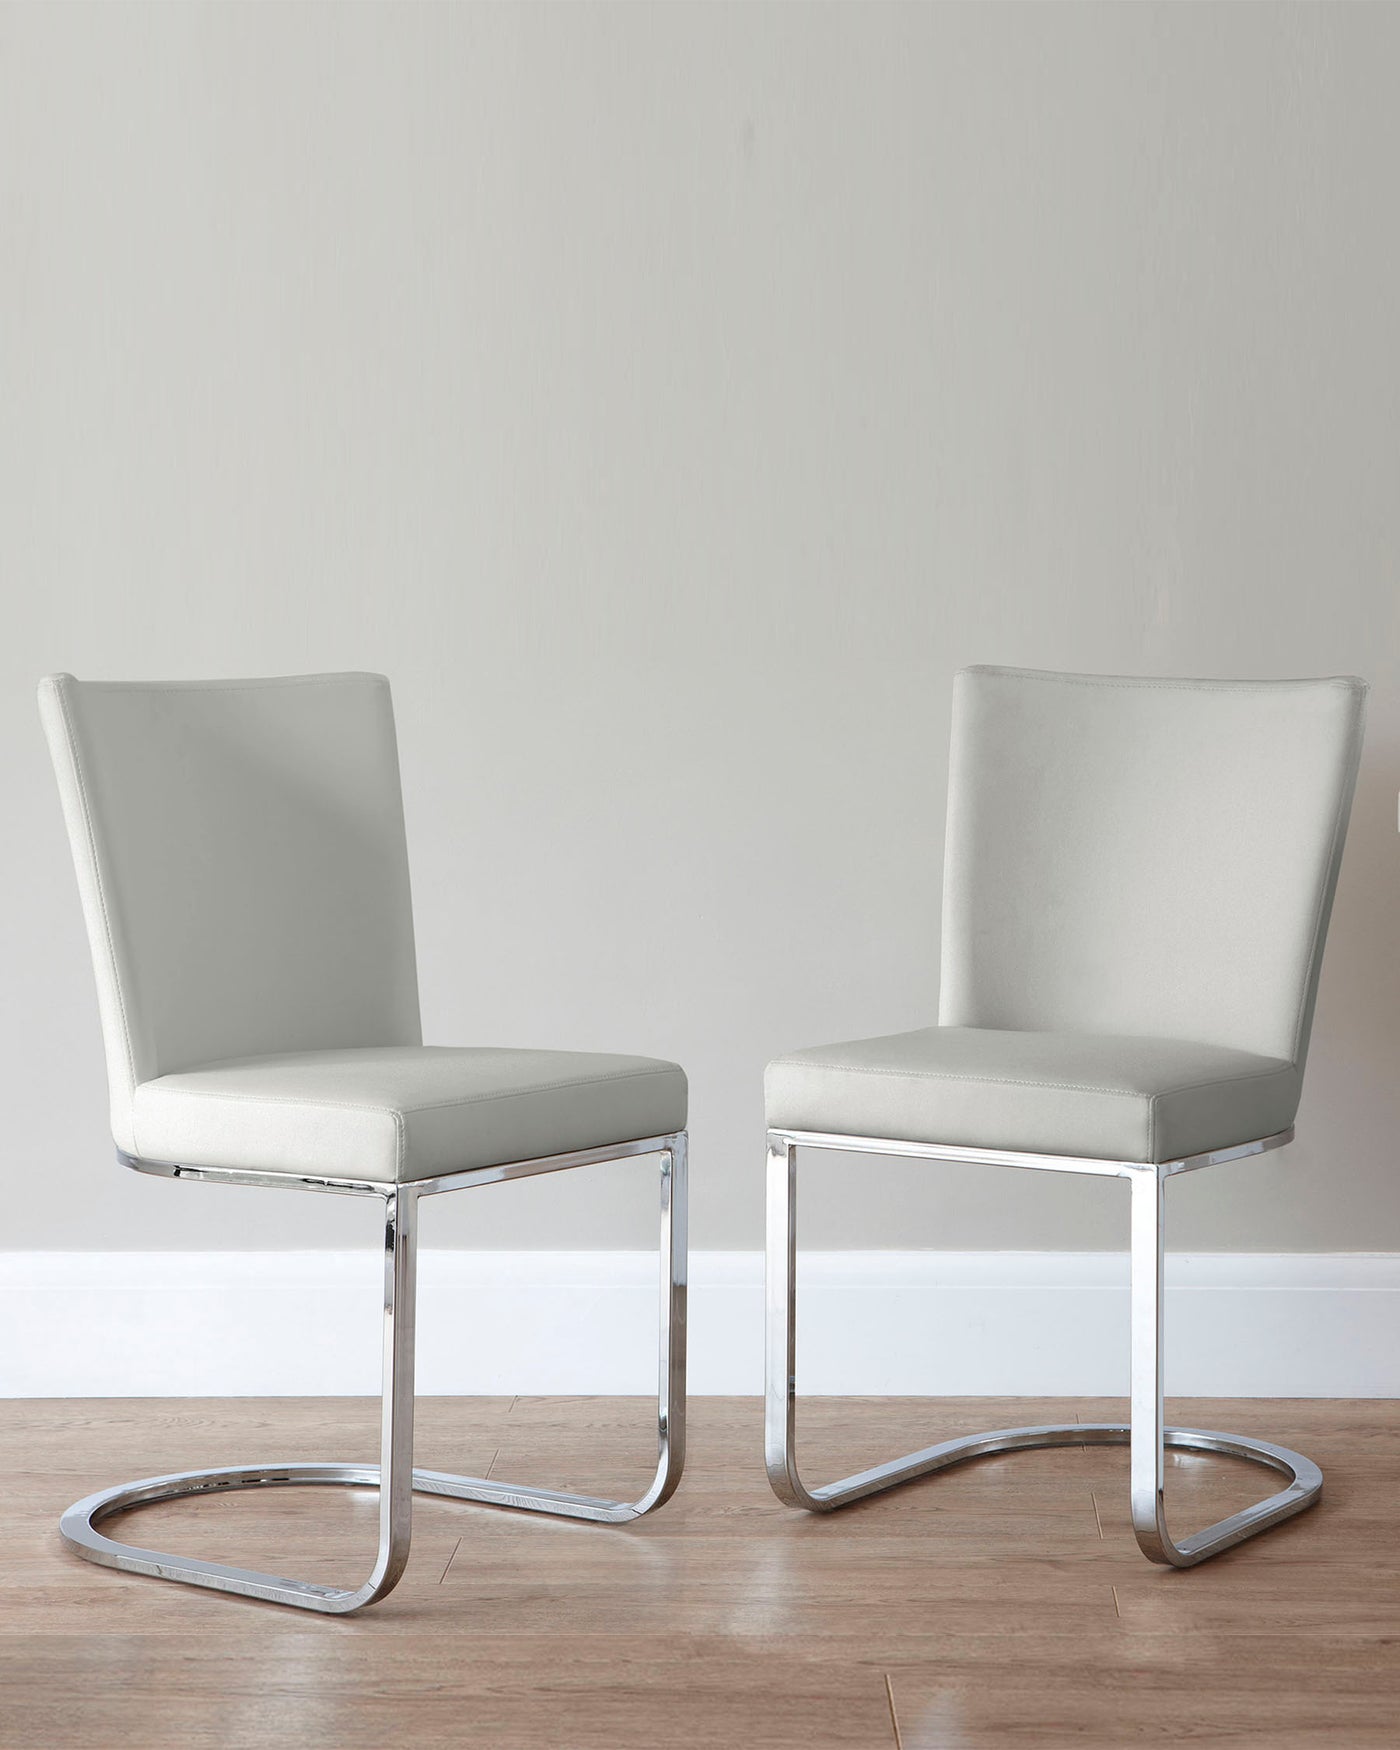 Two modern light grey upholstered chairs with sleek chrome cantilever bases, positioned on a wooden floor against a plain wall.